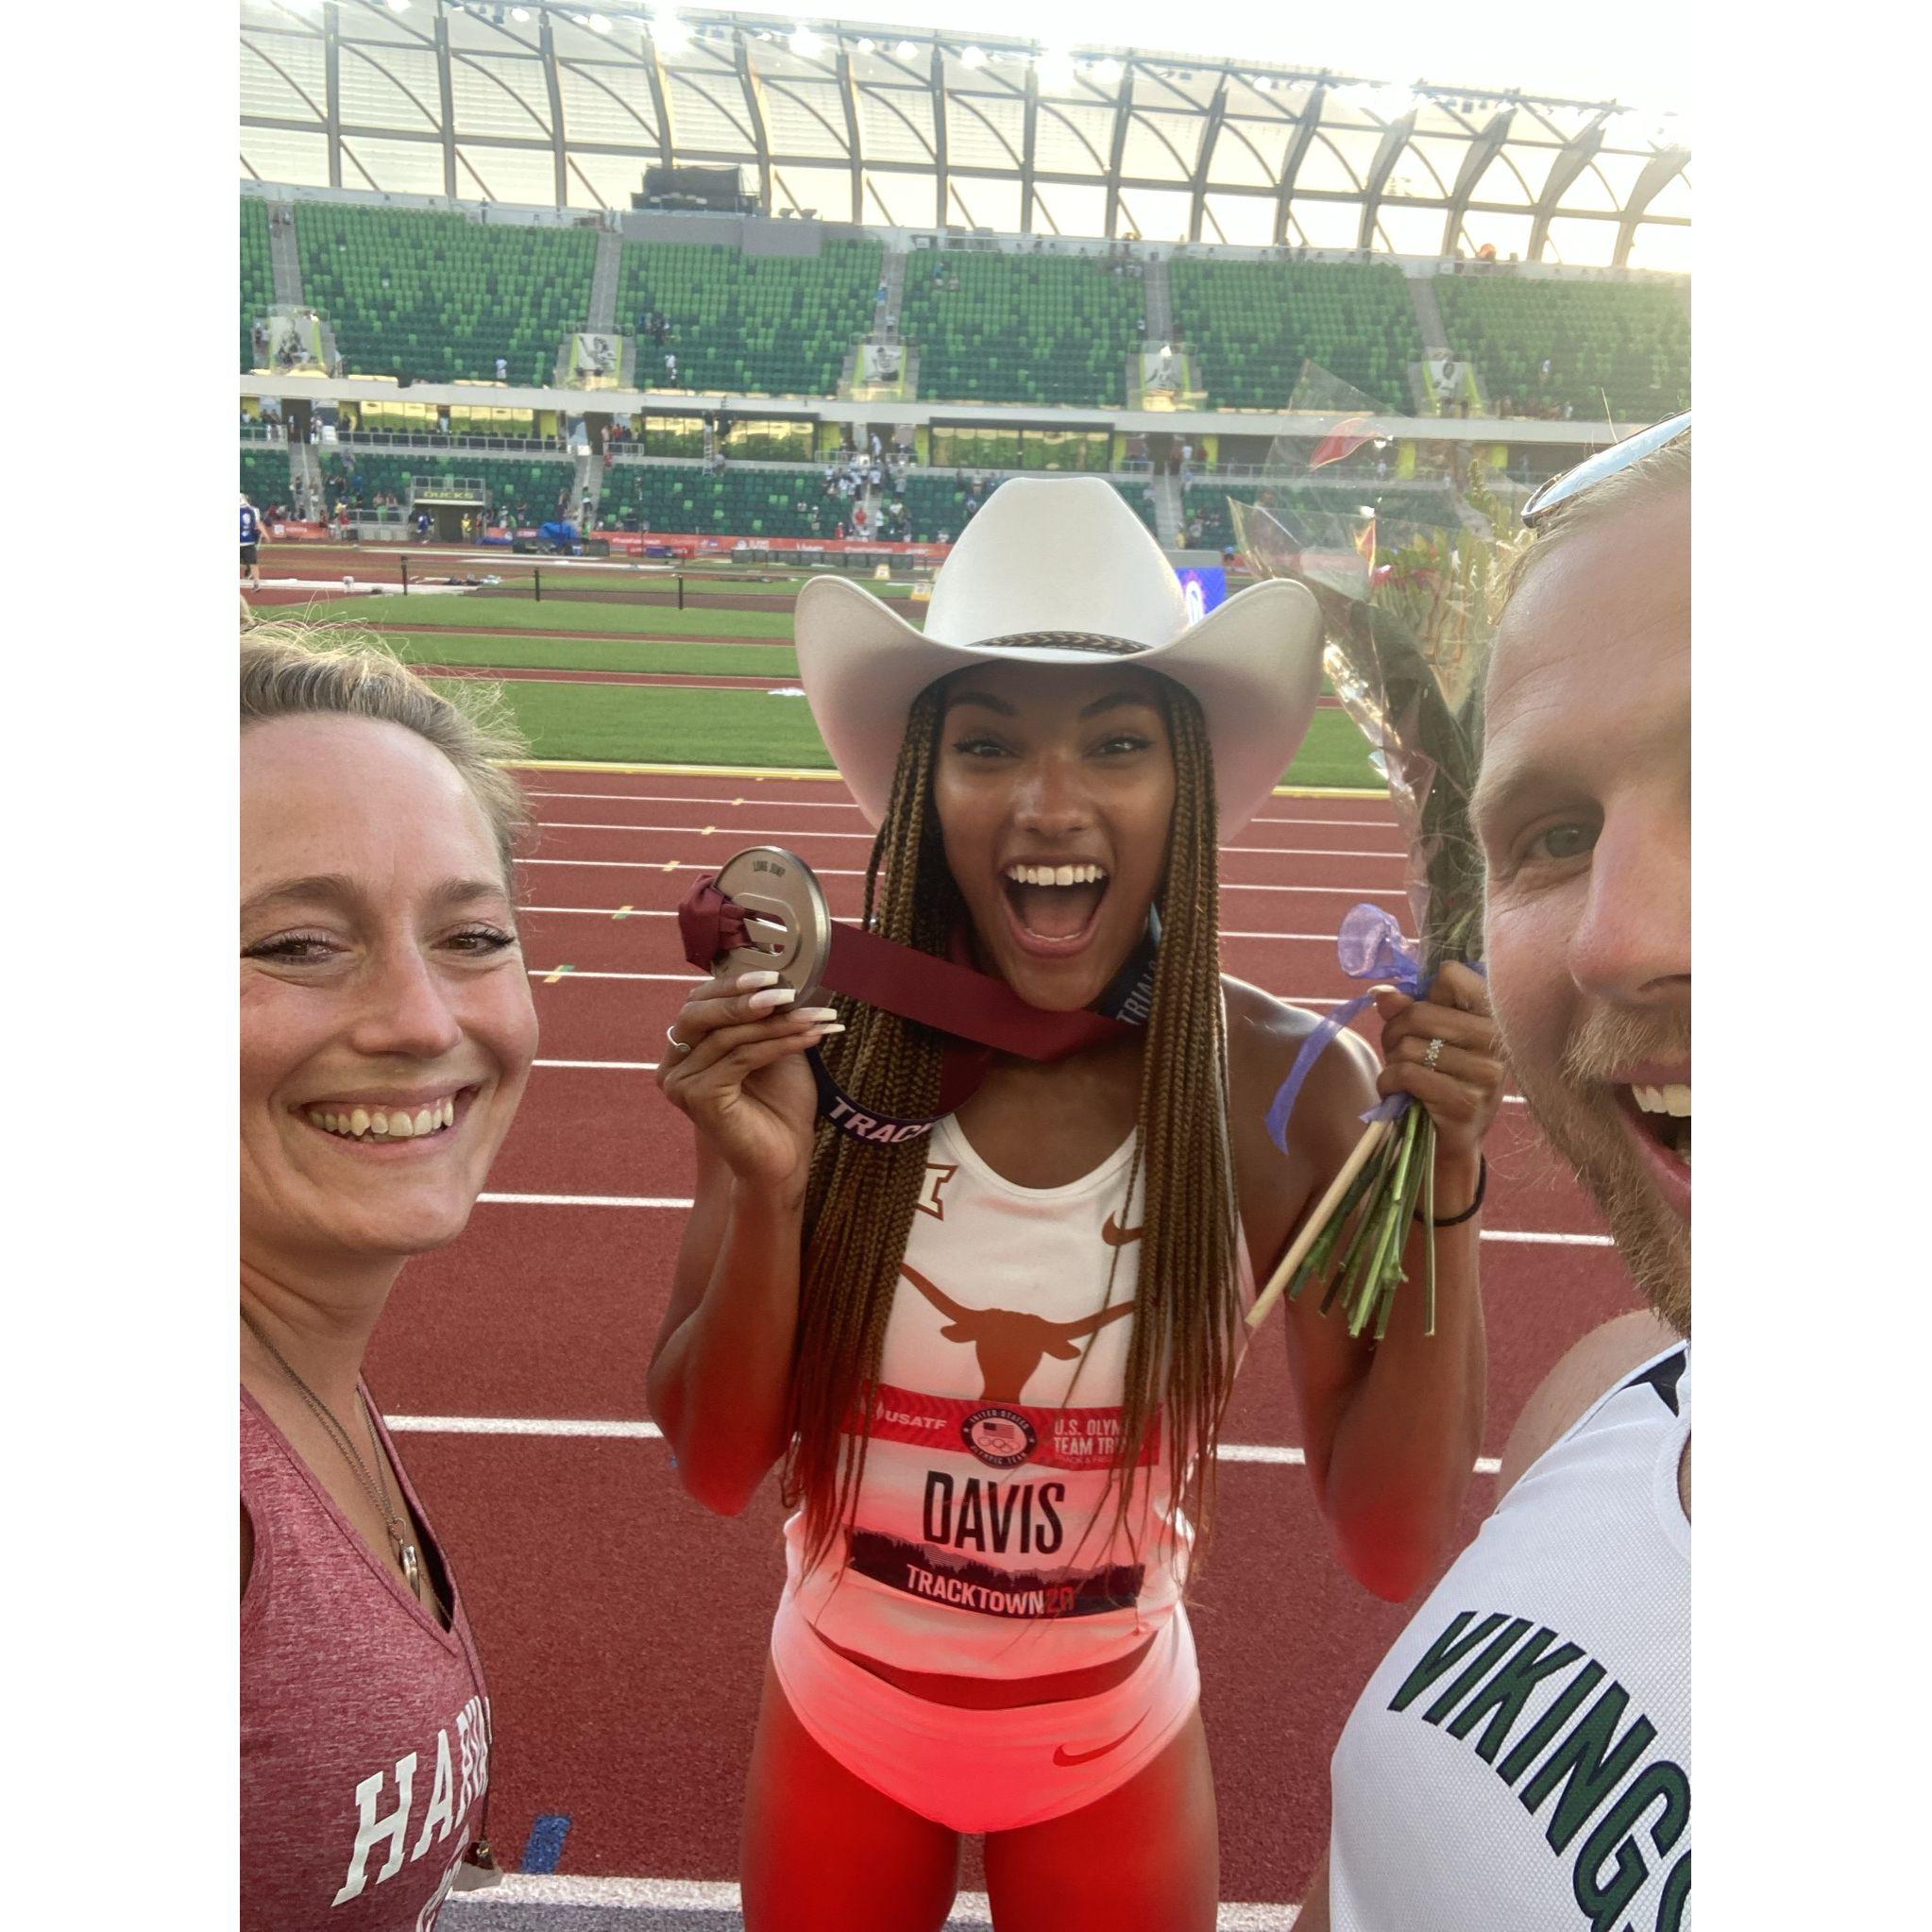 We made sure to send some love to our favorite High Jumper